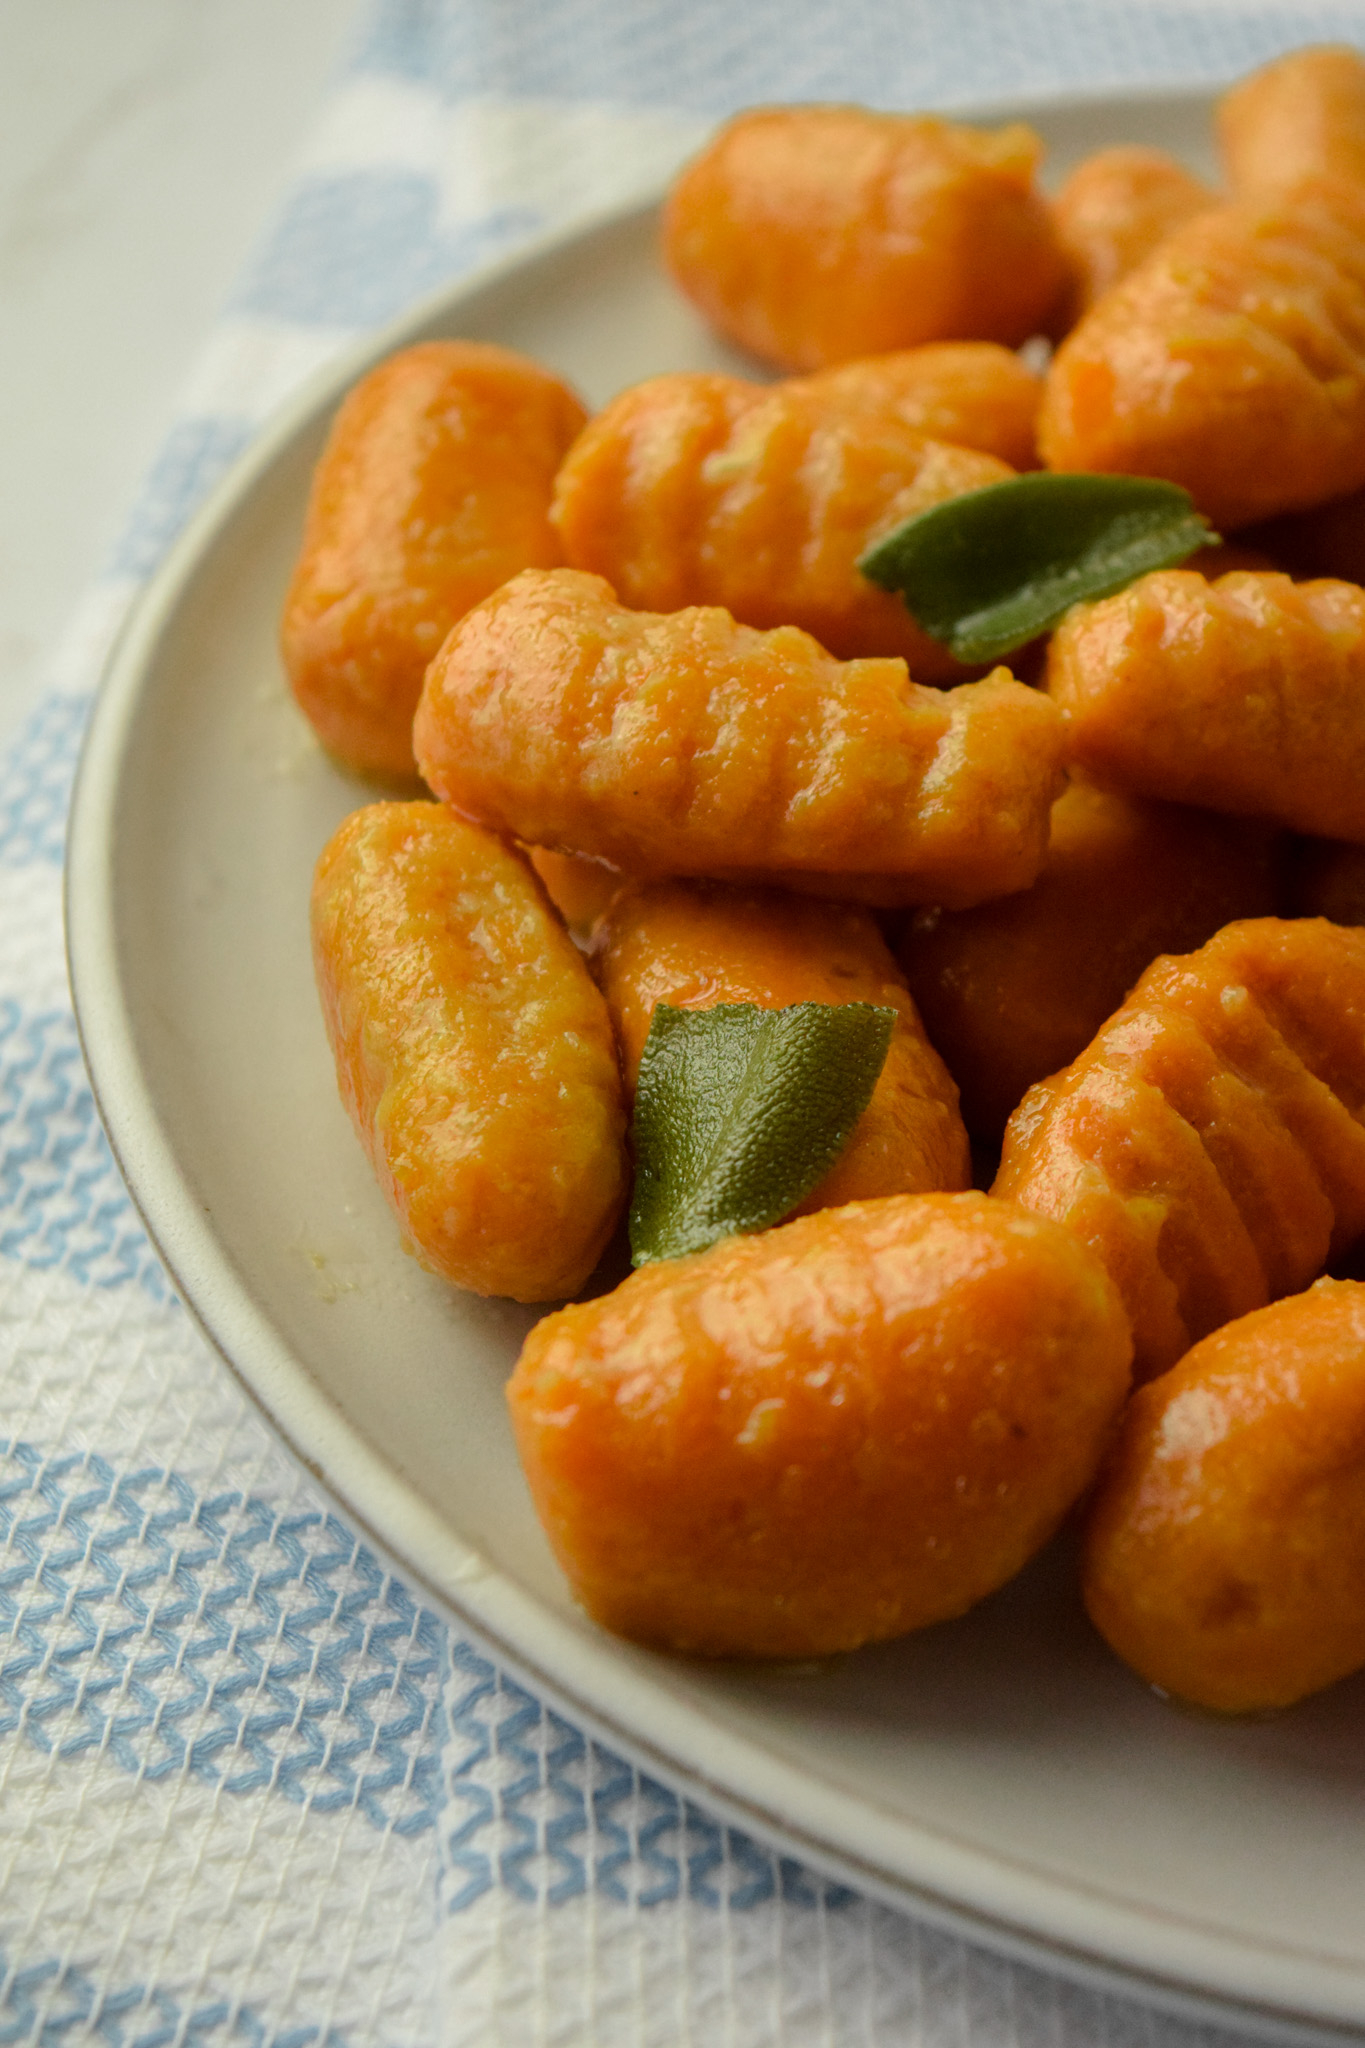 Plate of Gluten Free Sweet Potato Gnocchi with Sage Leaves